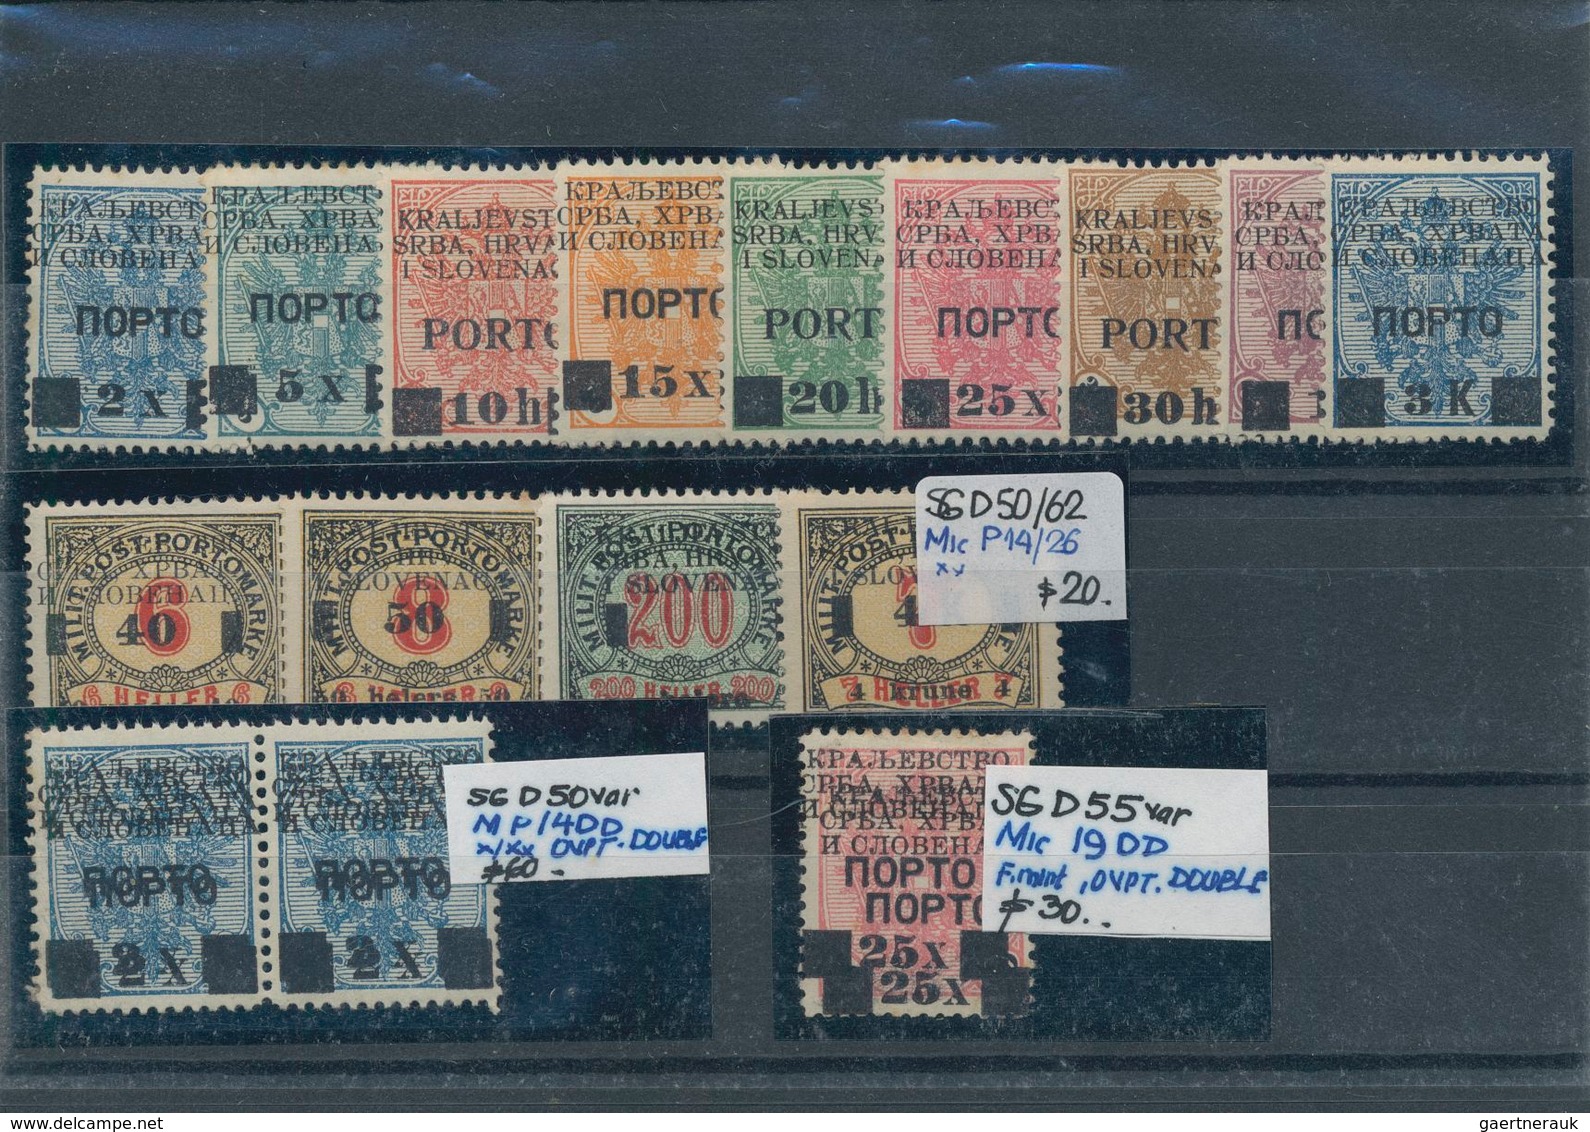 Jugoslawien: 1918/1920, mint and used holding on stockcards in a small binder, comprising issues for